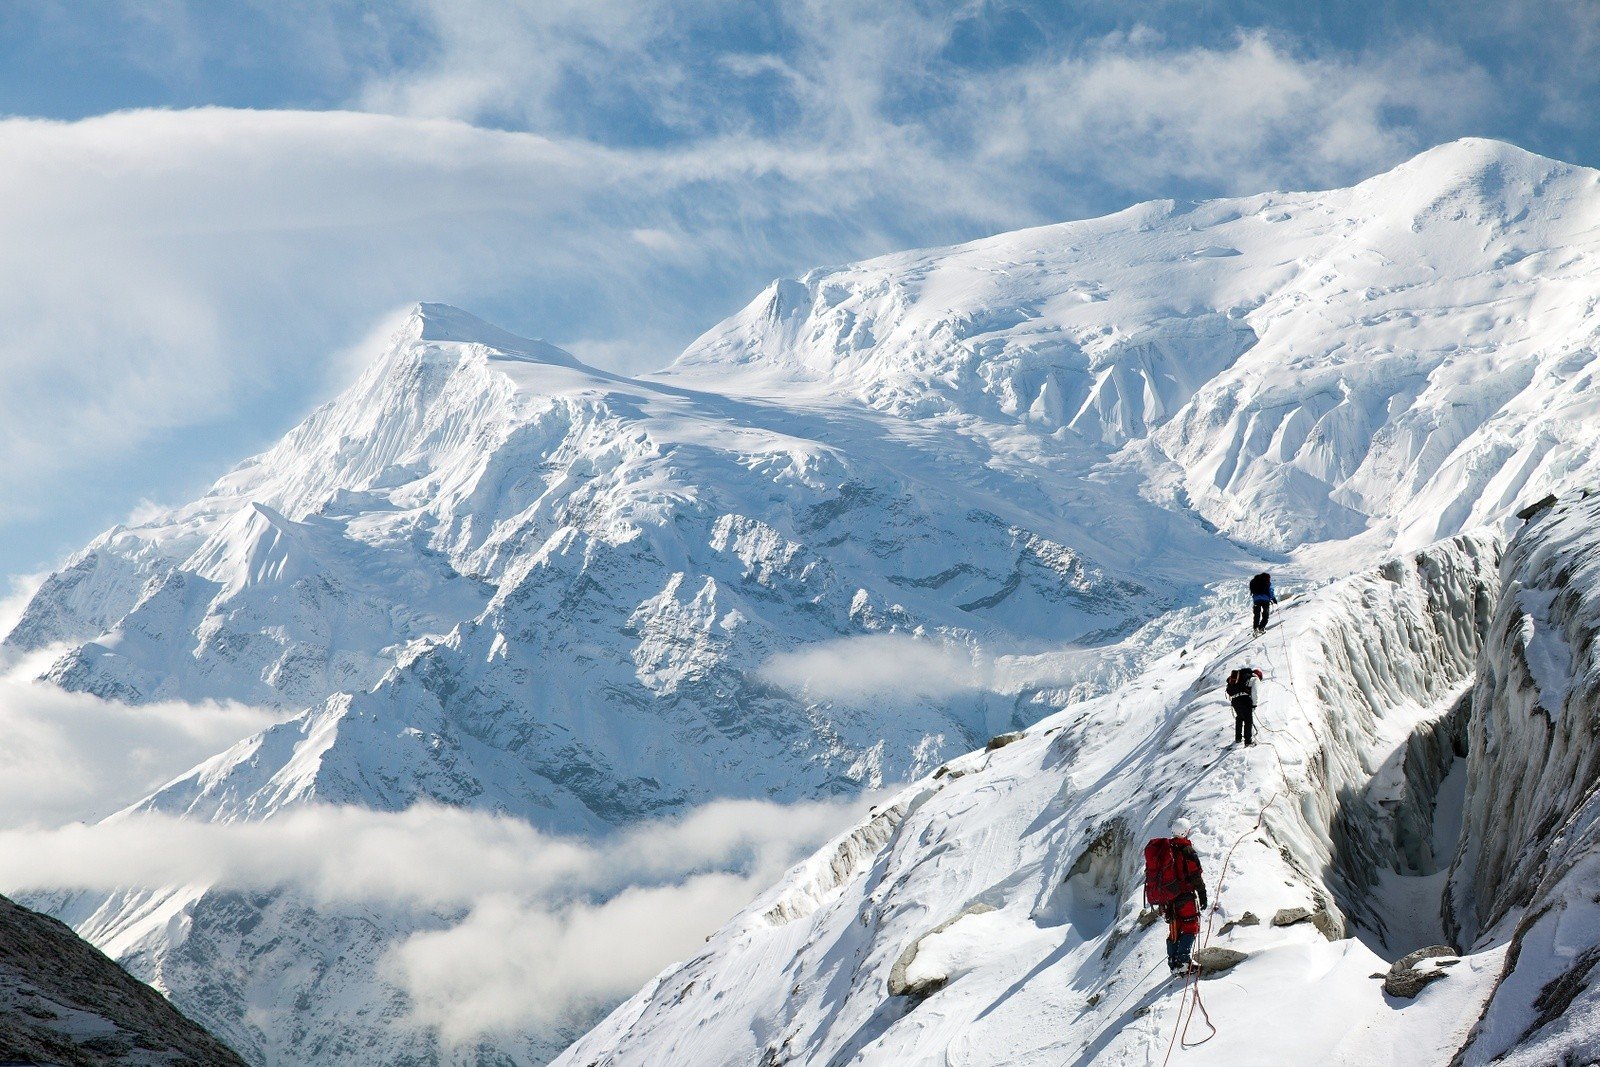 Mountaineers make their way along the top of a snowy mountain pass.